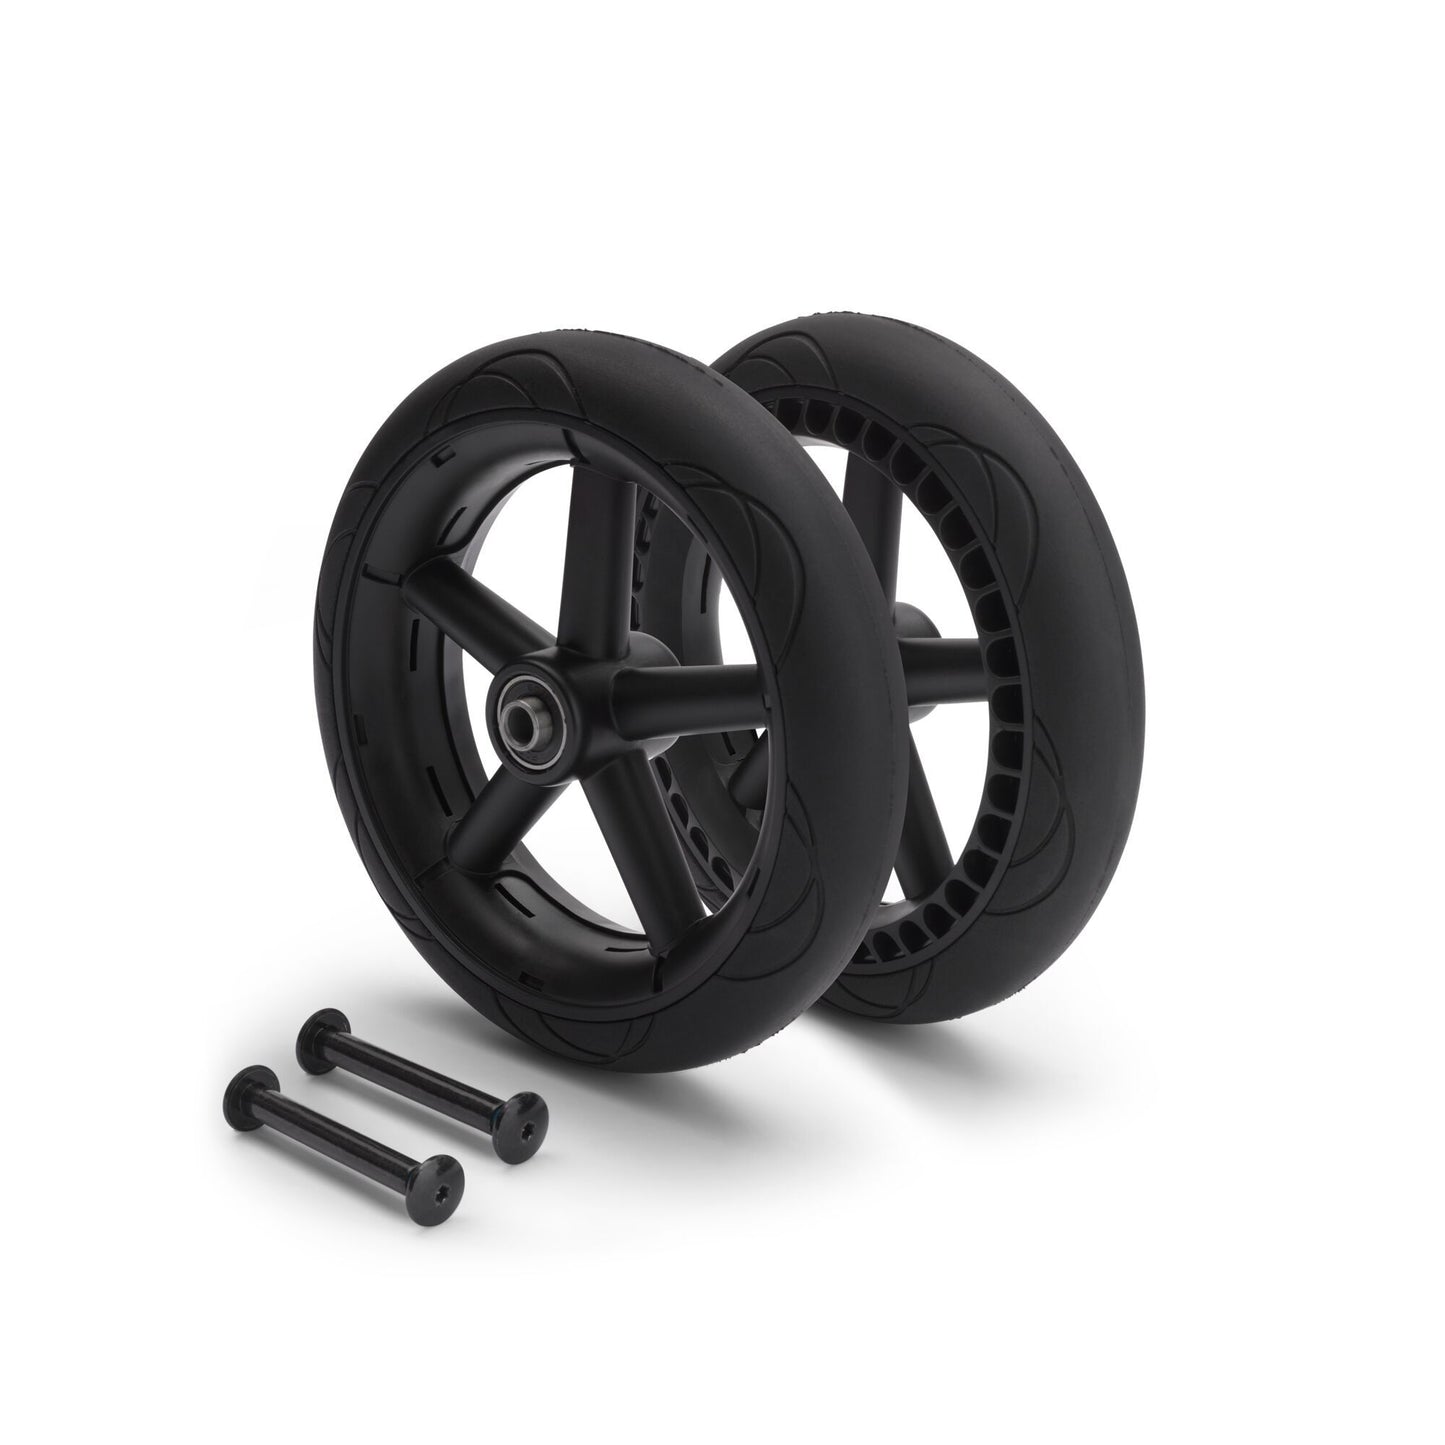 Bugaboo Bee 6 Rear Wheels Replacement Set (2 Pack)